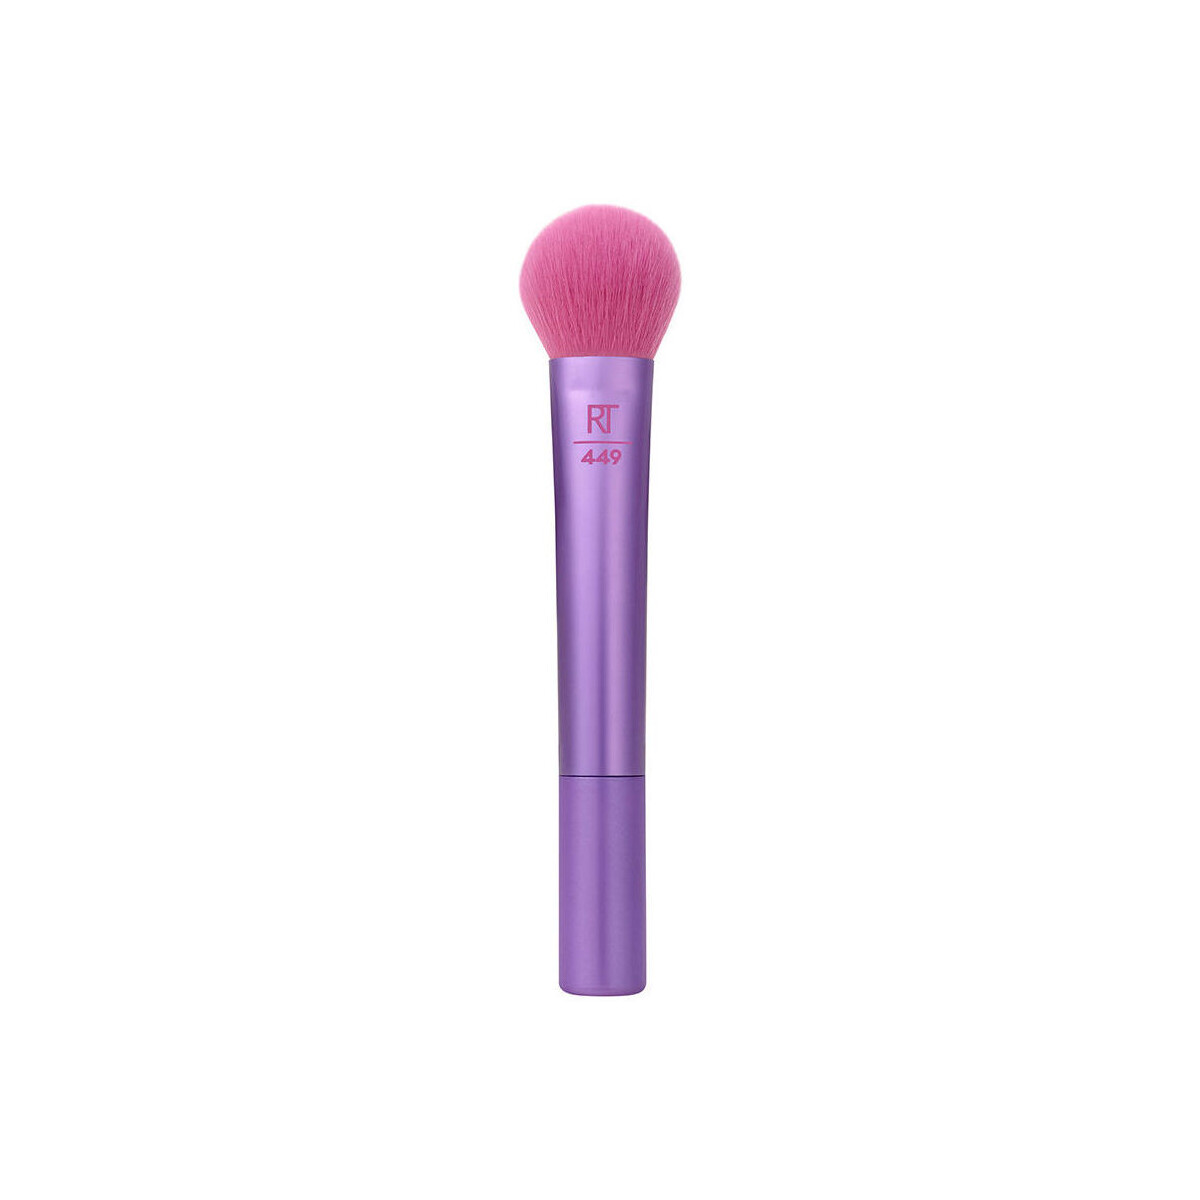 Beauty Damen Pinsel Real Techniques Afterglow Feeling Flush Rougepinsel 1 St 